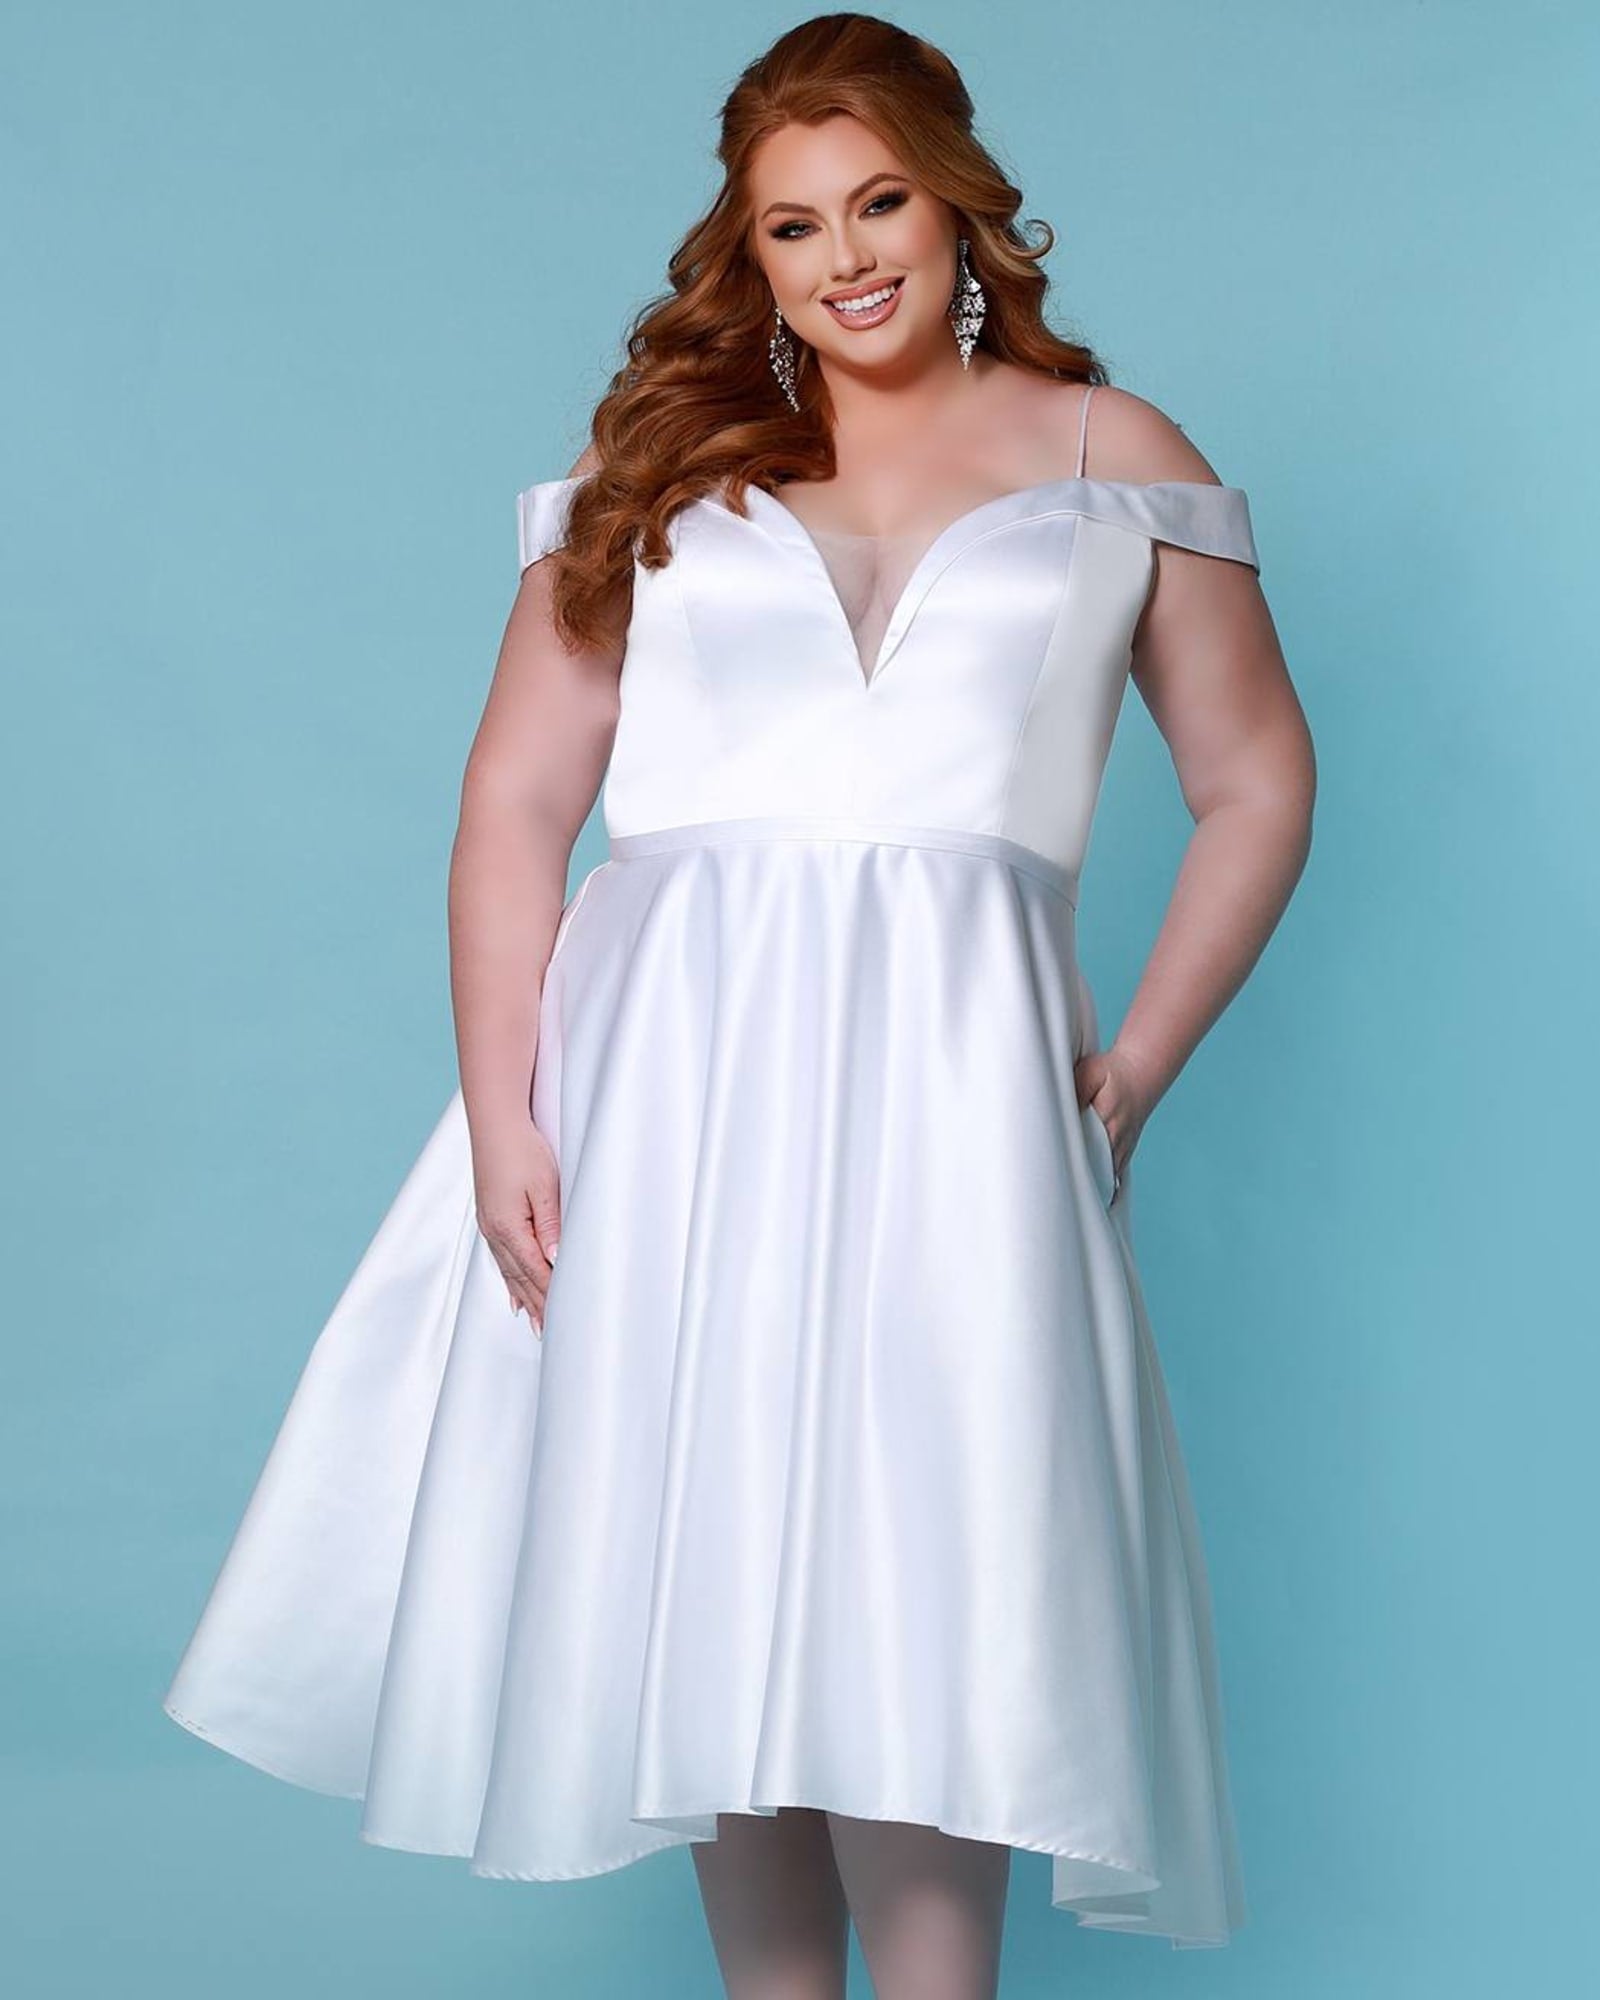 Halter Plus Size Wedding Gown with Tiered Skirt – A Practical Wedding